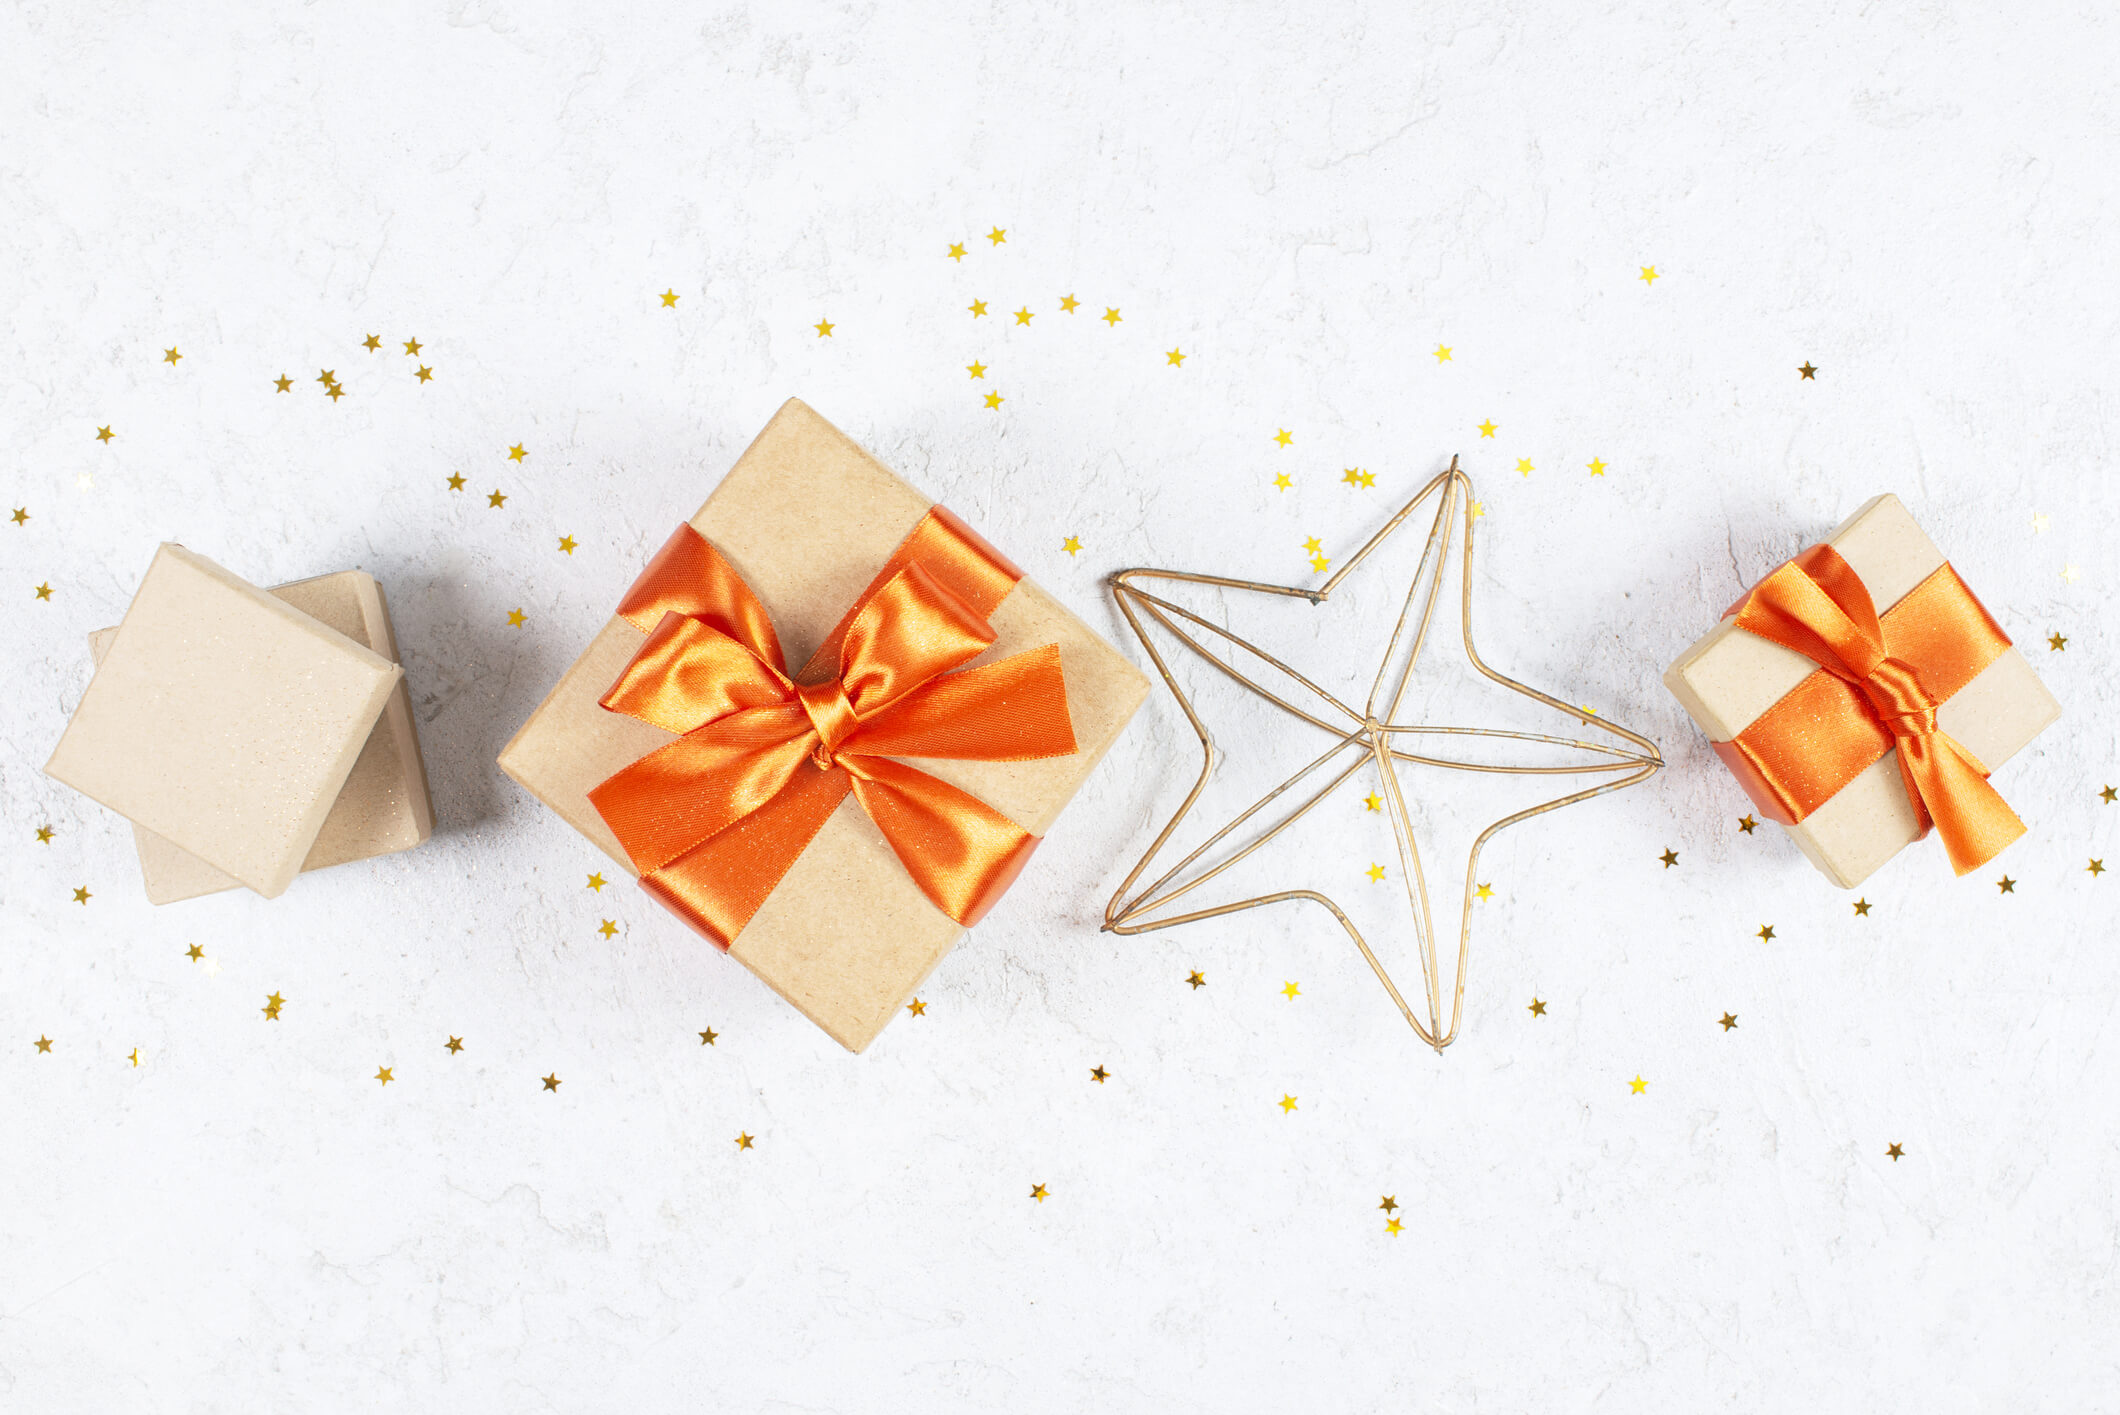 Festive image featuring gift boxes and stars